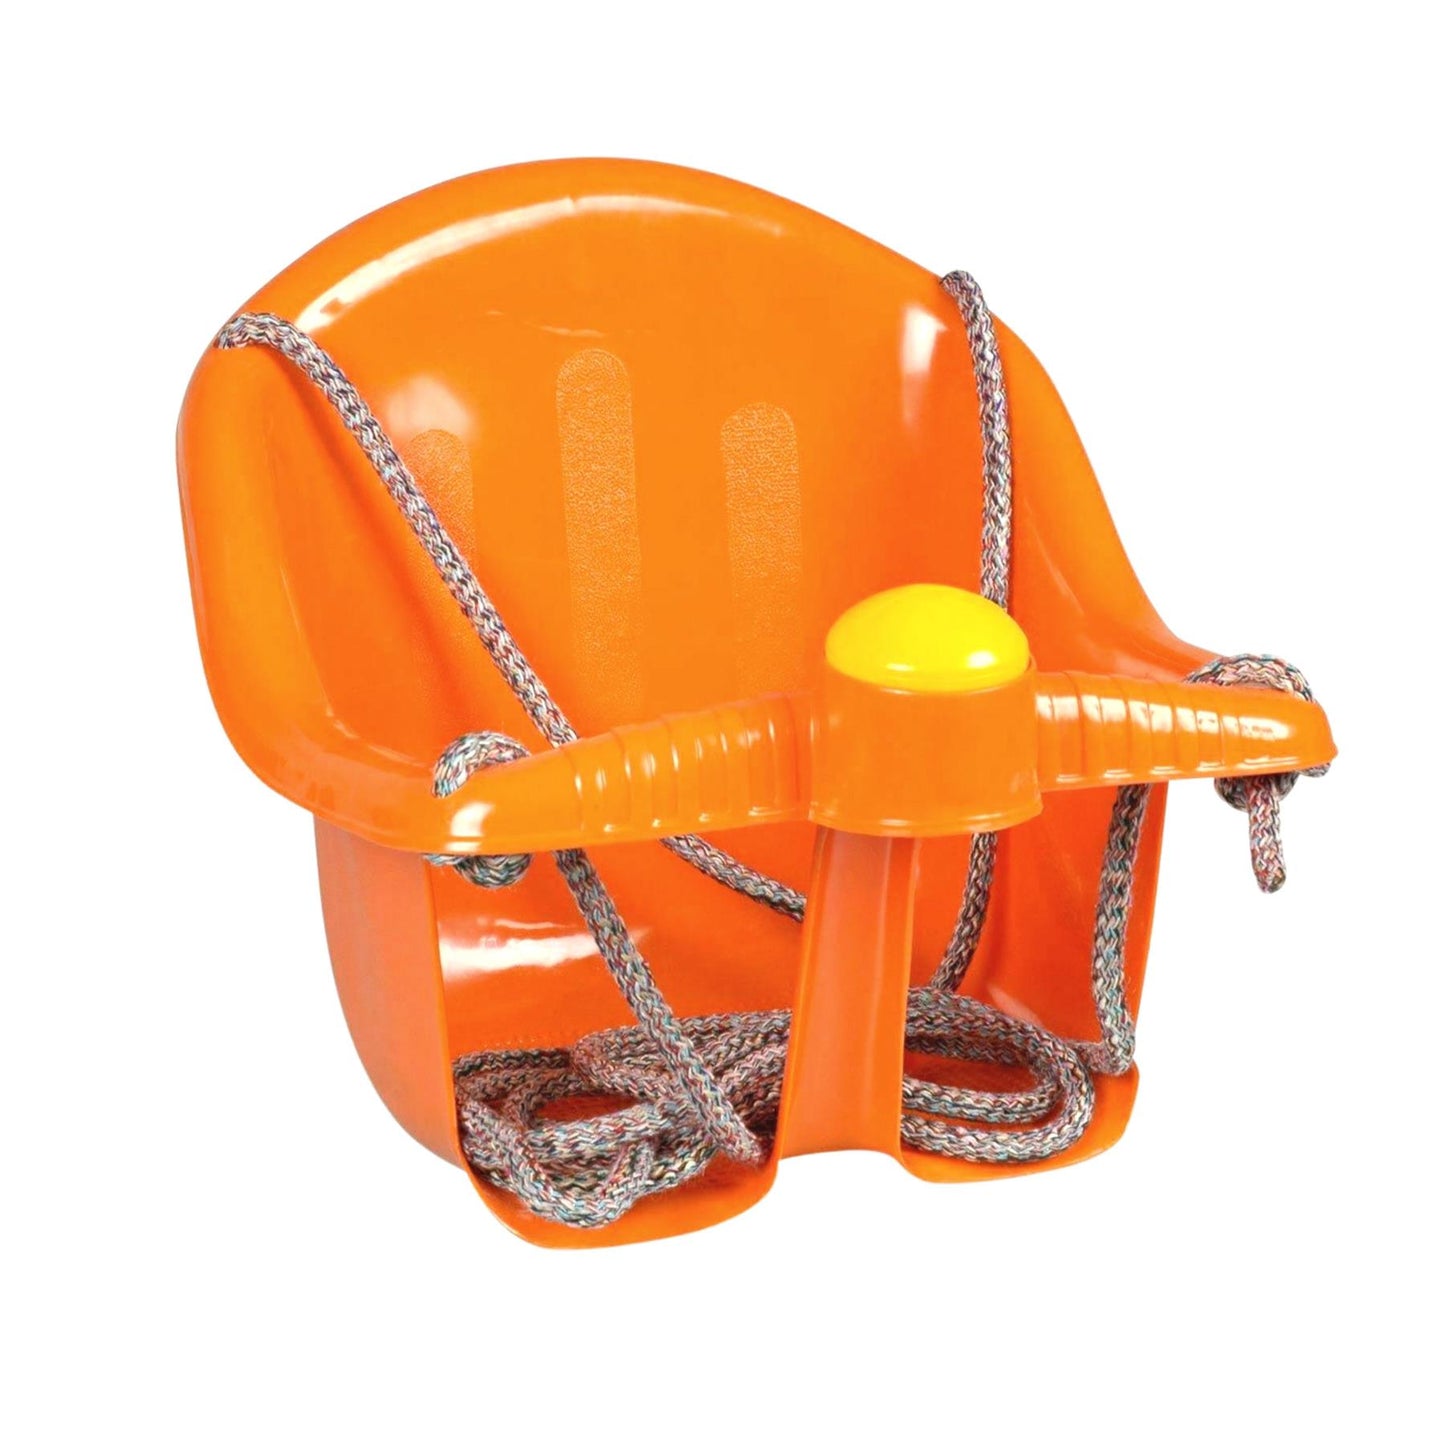 Toddler Safety Safe Swing Seat with Adjustable Garden Rope by The Magic Toy Shop - UKBuyZone